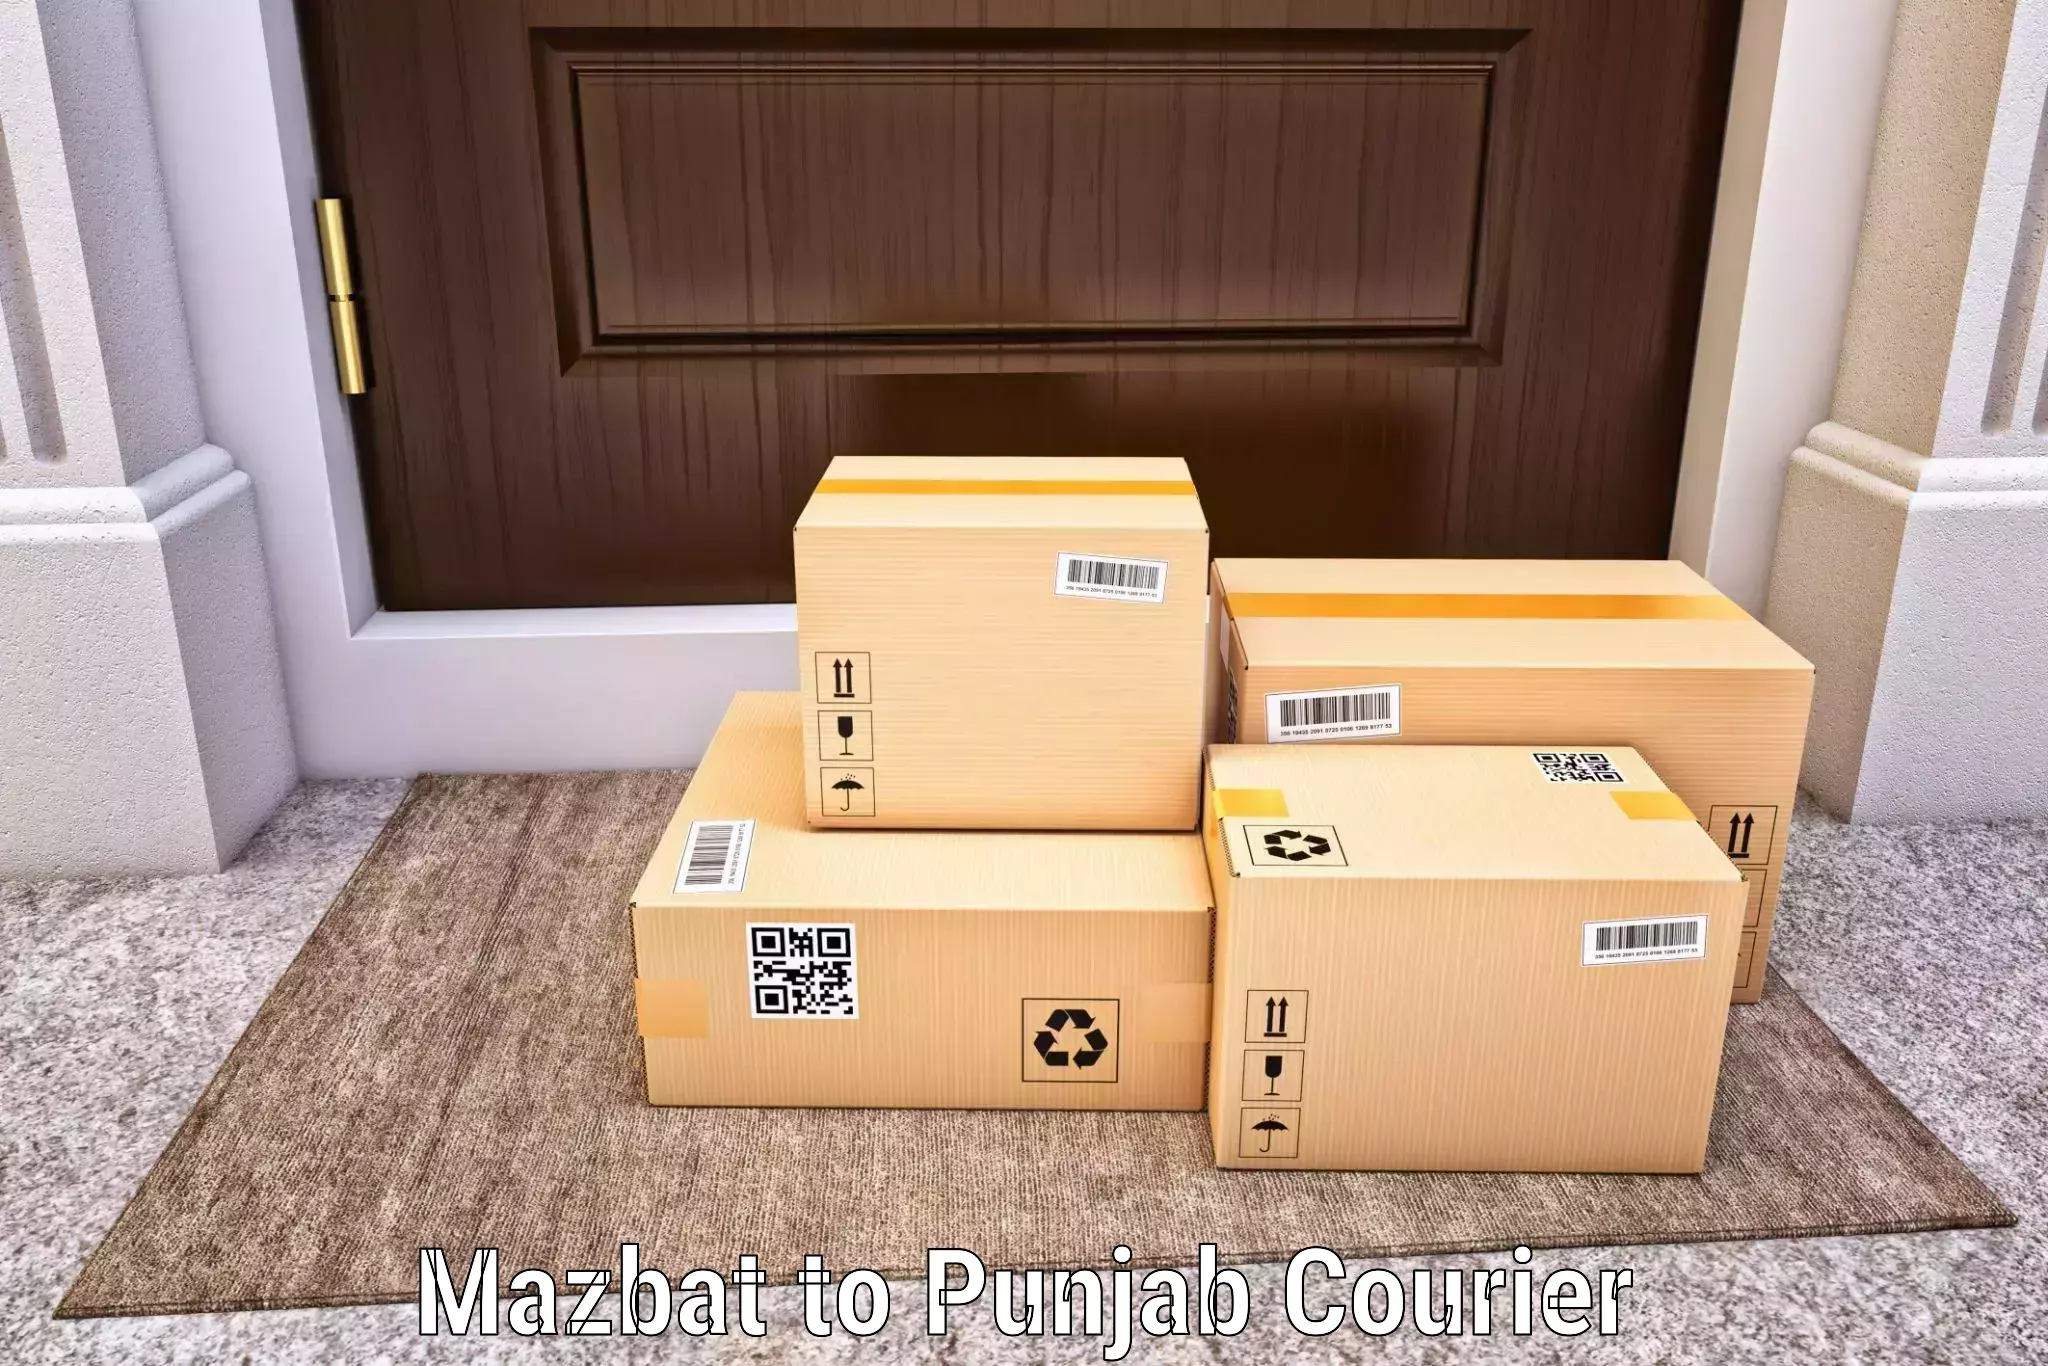 Supply chain delivery in Mazbat to Punjab